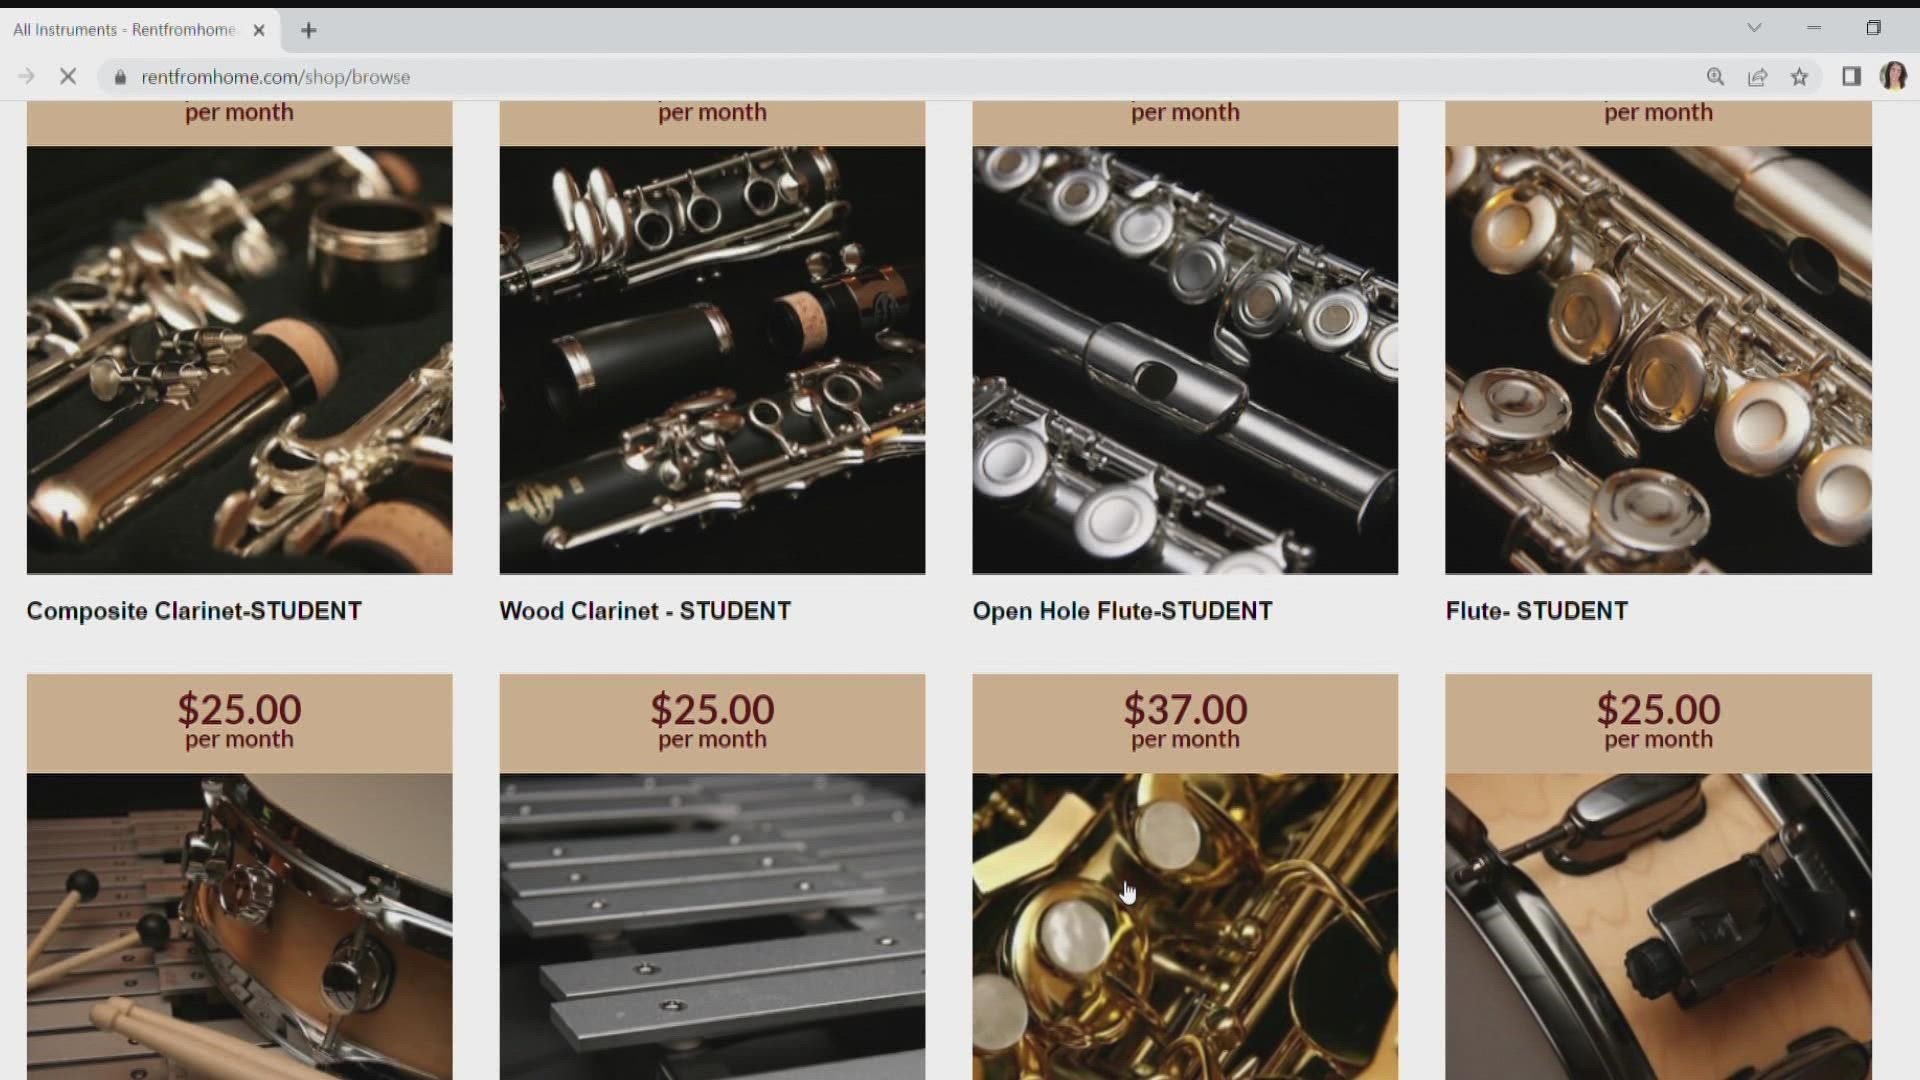 Here are some different payment options to provide your student with an instrument this school year.